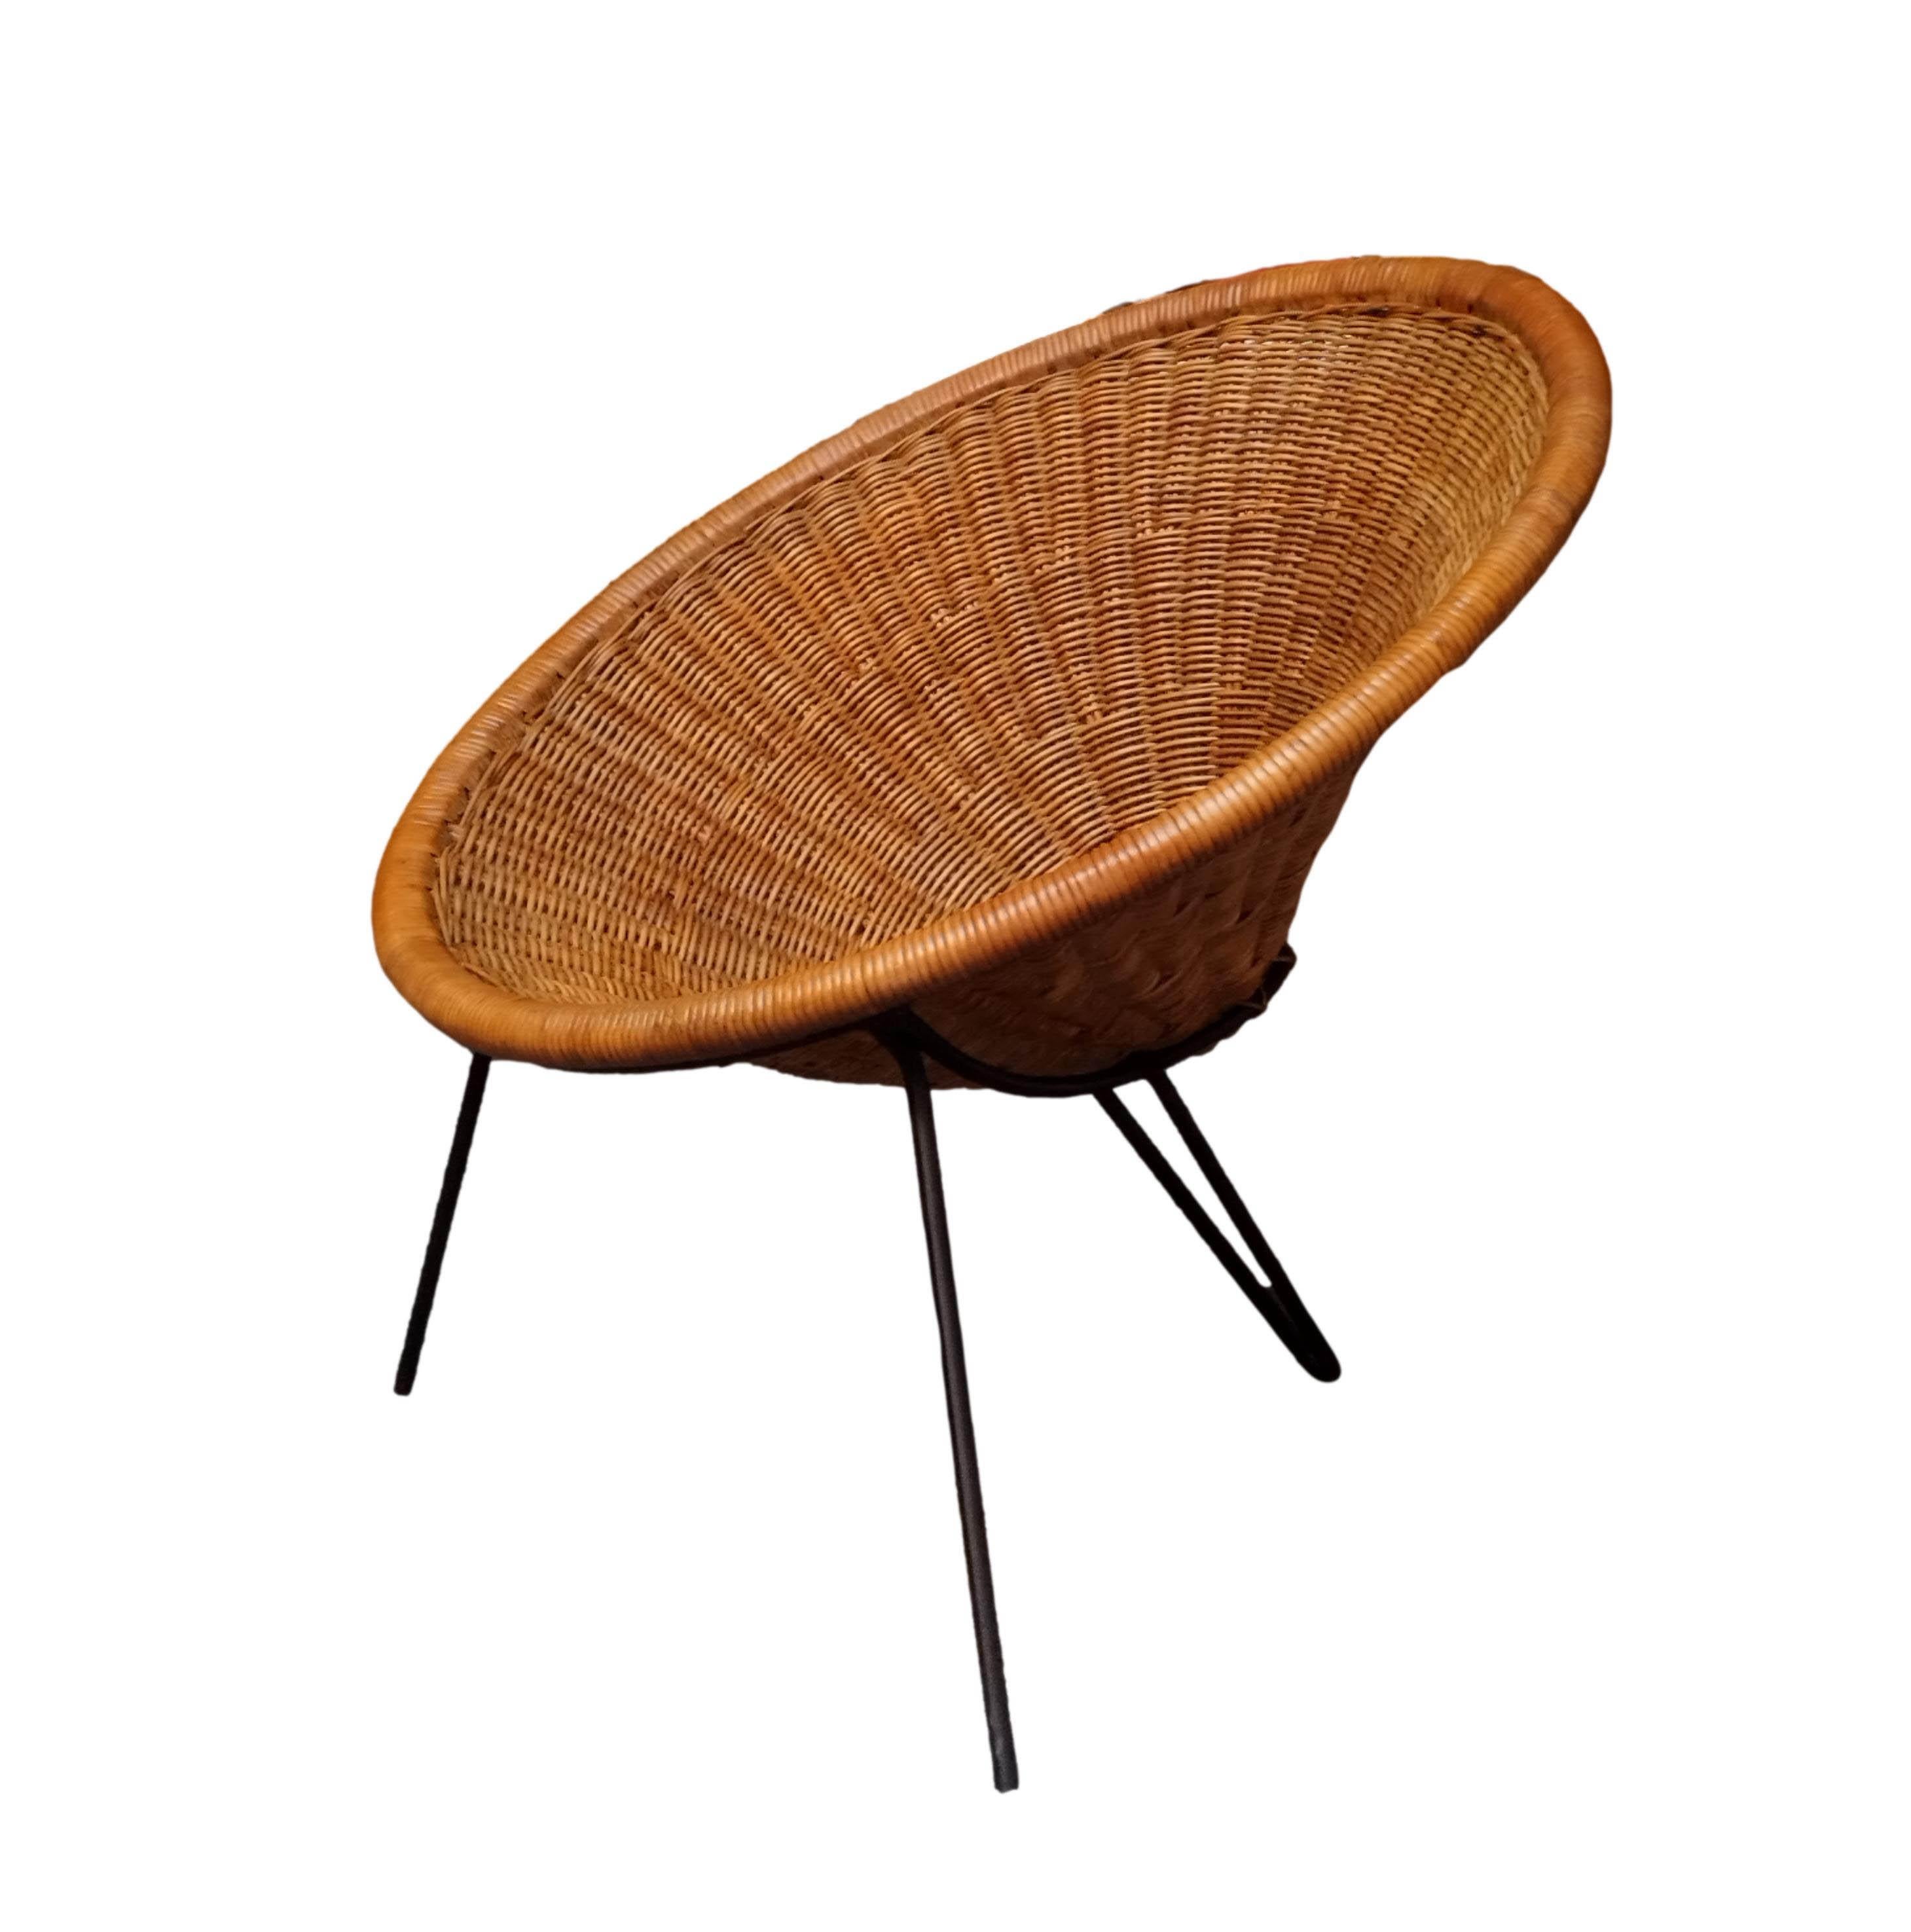 Beautiful, extremely rare tripod lounge chairin rattan.
Great 1950s design made in Italy by Roberto Mango.
The seat shell is made entirely of wicker the three-legged iron frame consists of 2 legs at the front and a hairpin leg at the back. The shell